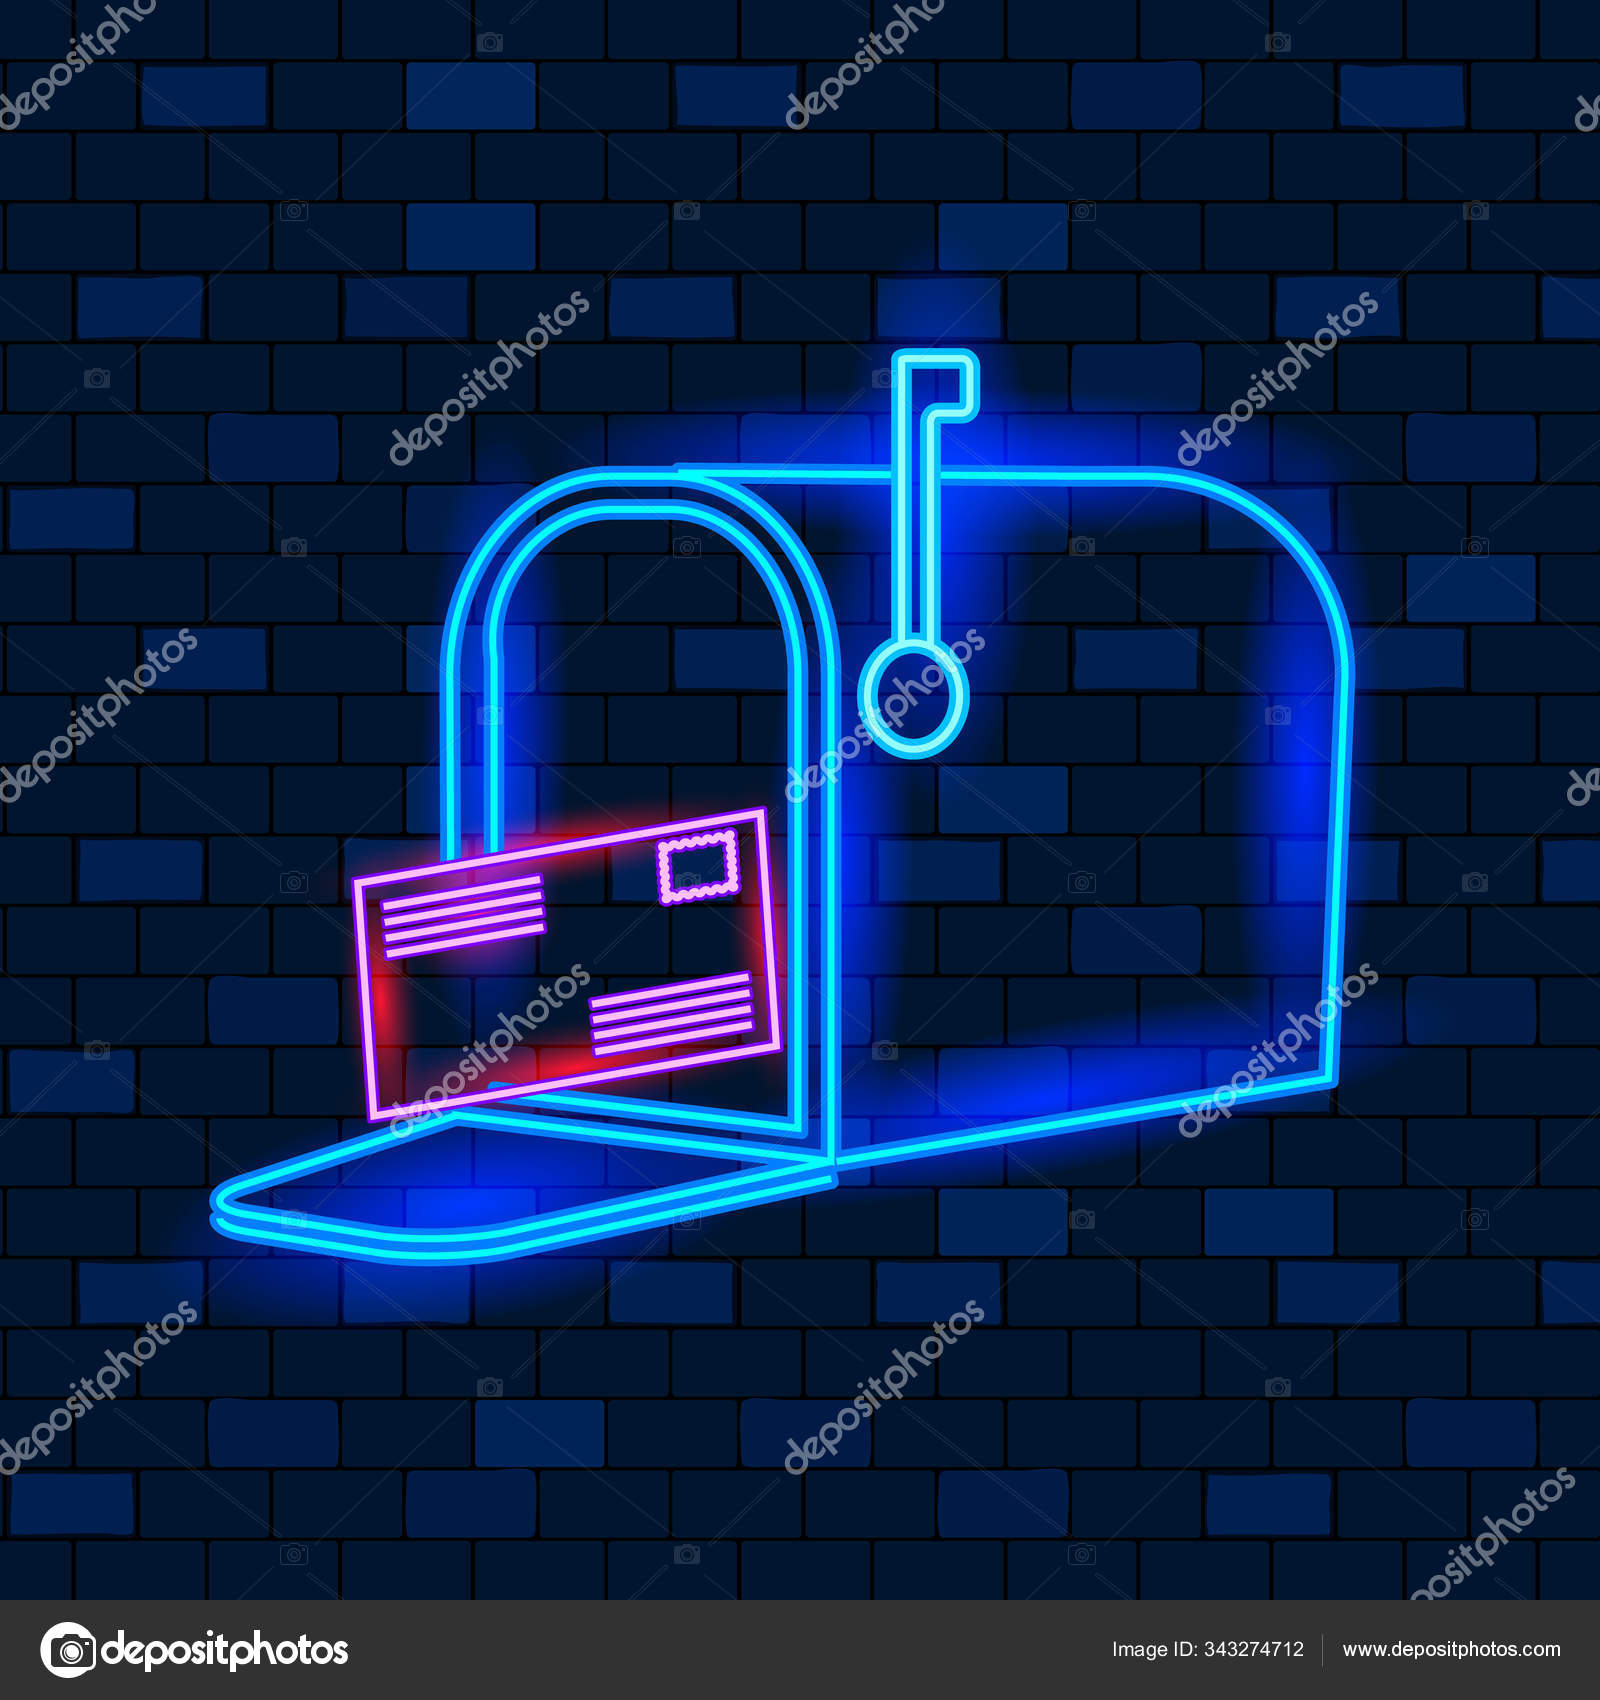 Vip Neon Icons Concept Cute Vip Neon Mailbox With Envelope On The Dark Brick Wall Background Neon Glowing Mailbox Sign Flat Style Vector Illustration Stock Vector C Alraun 343274712 - 8597637 76553 neon sign night club roblox